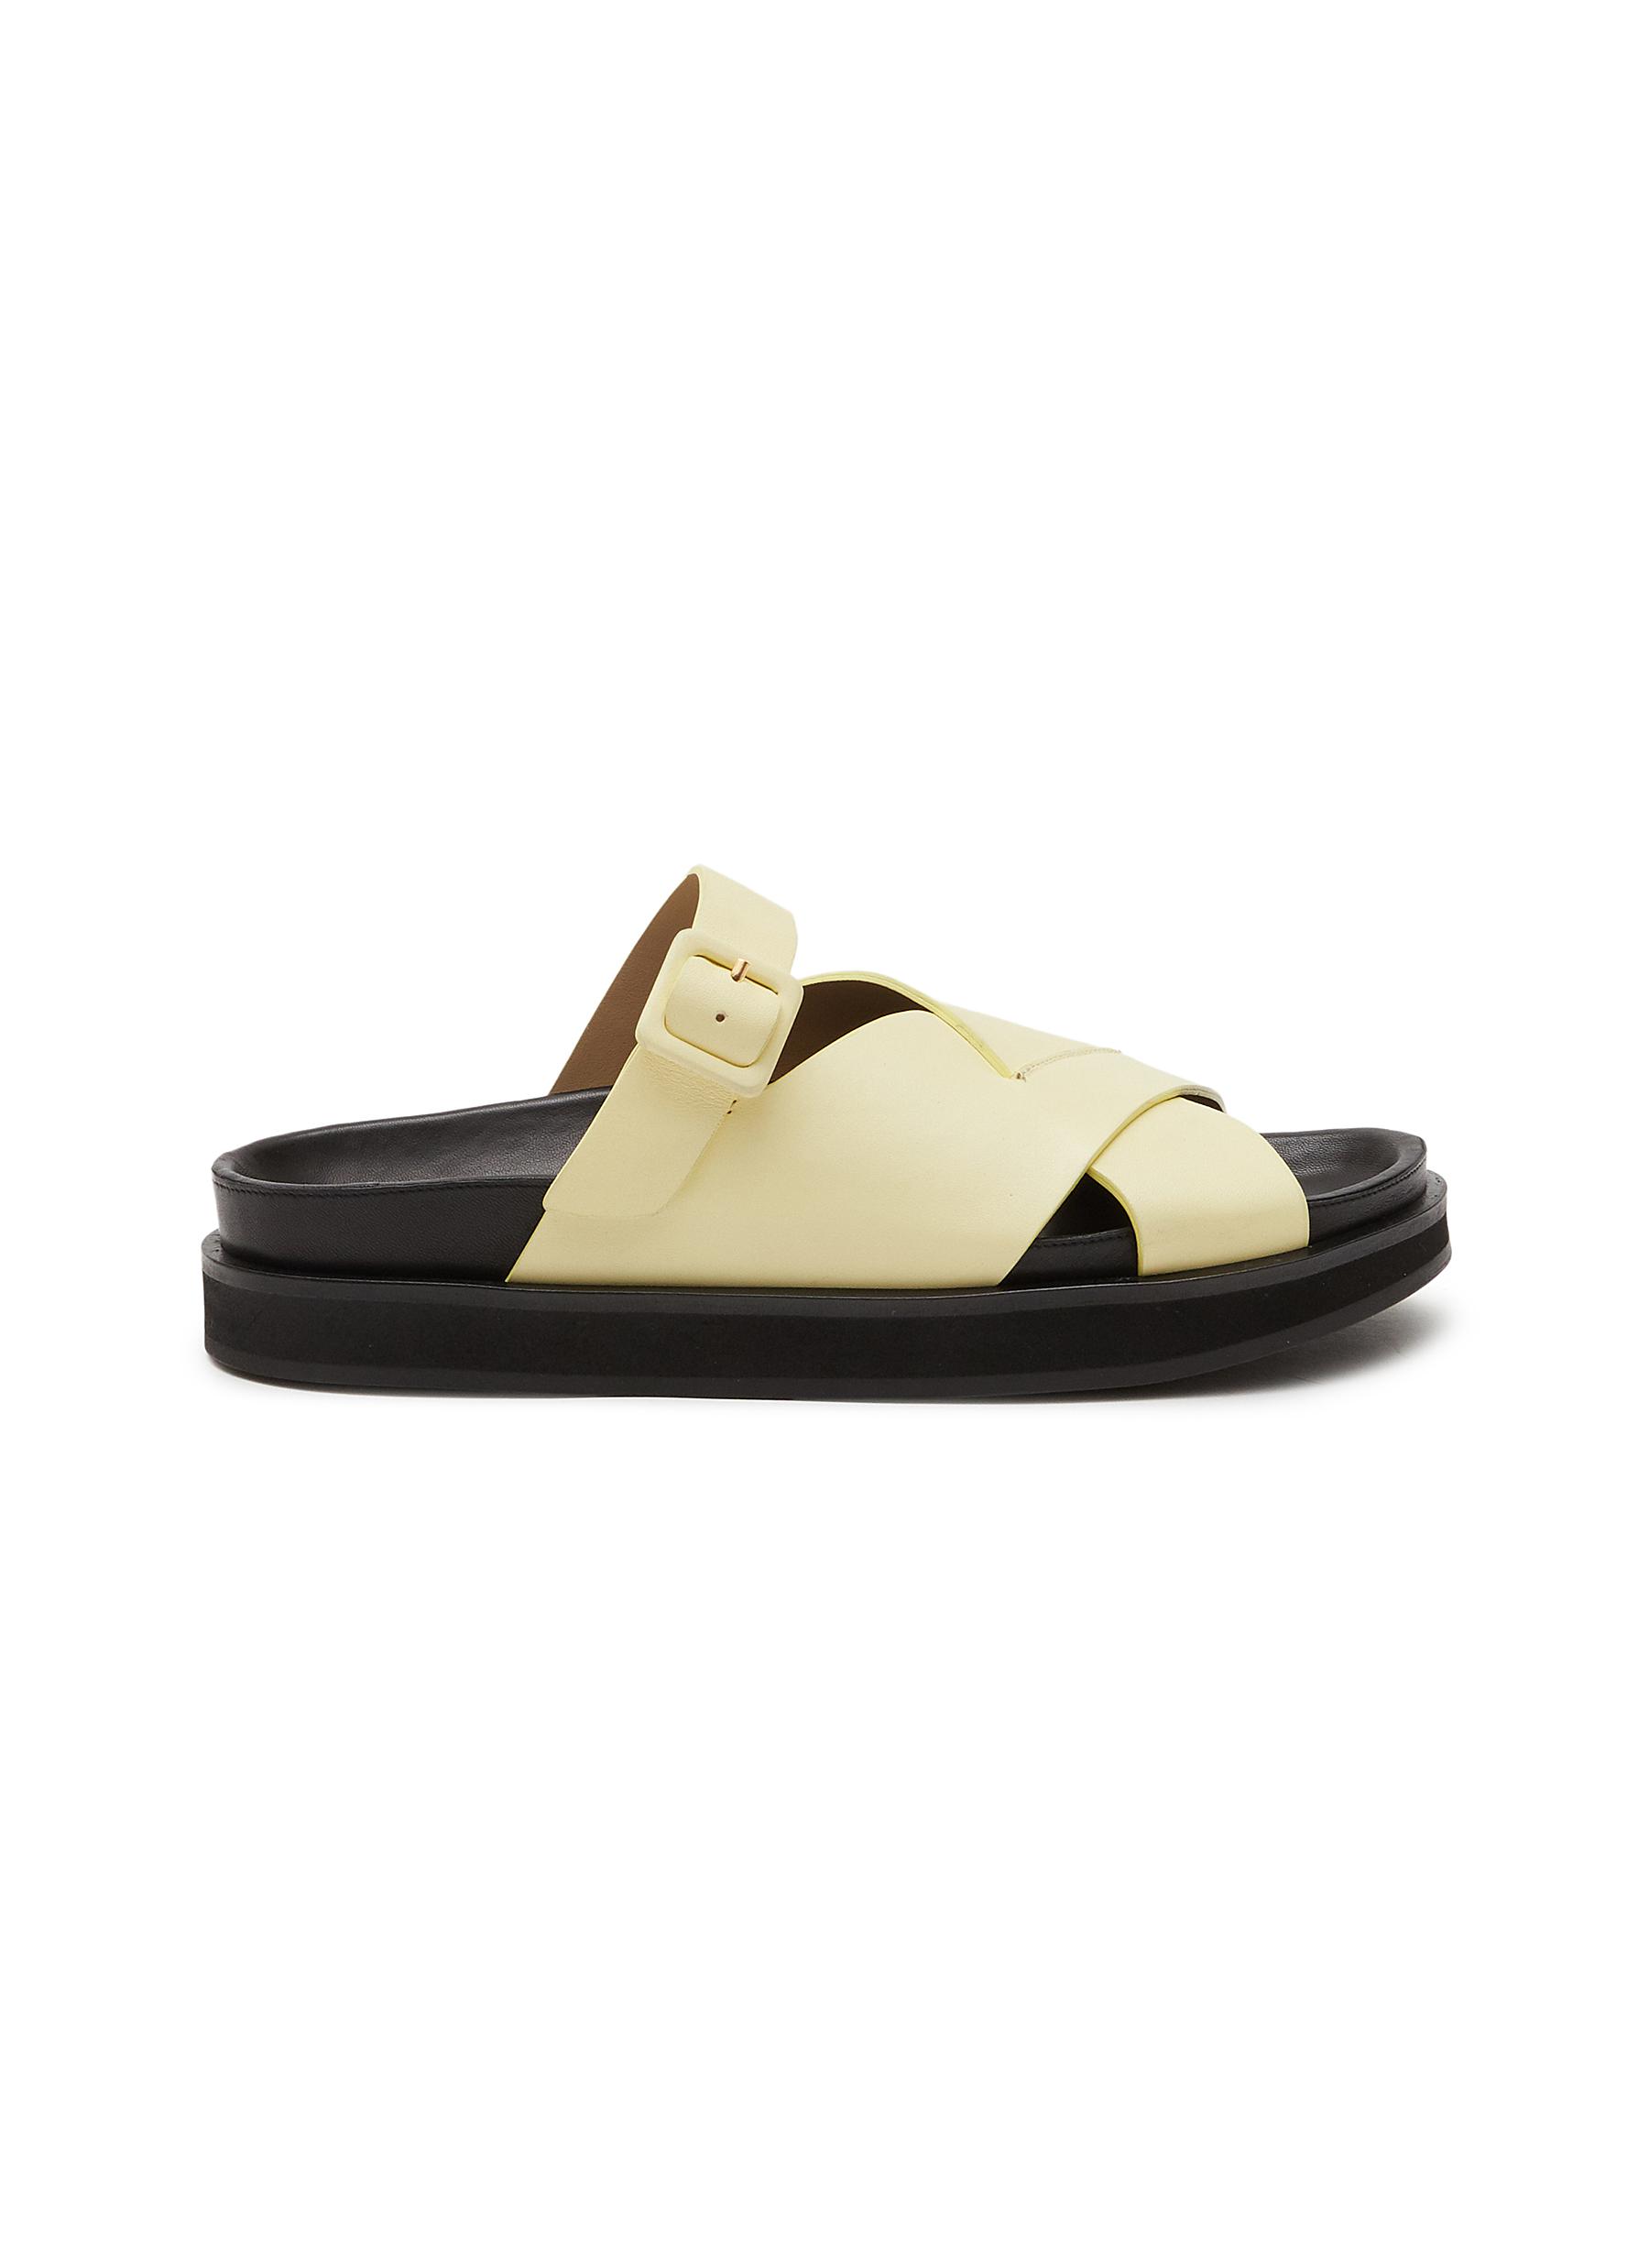 'KATE' THICK MULTI LEATHER BAND FLATFORM SANDALS